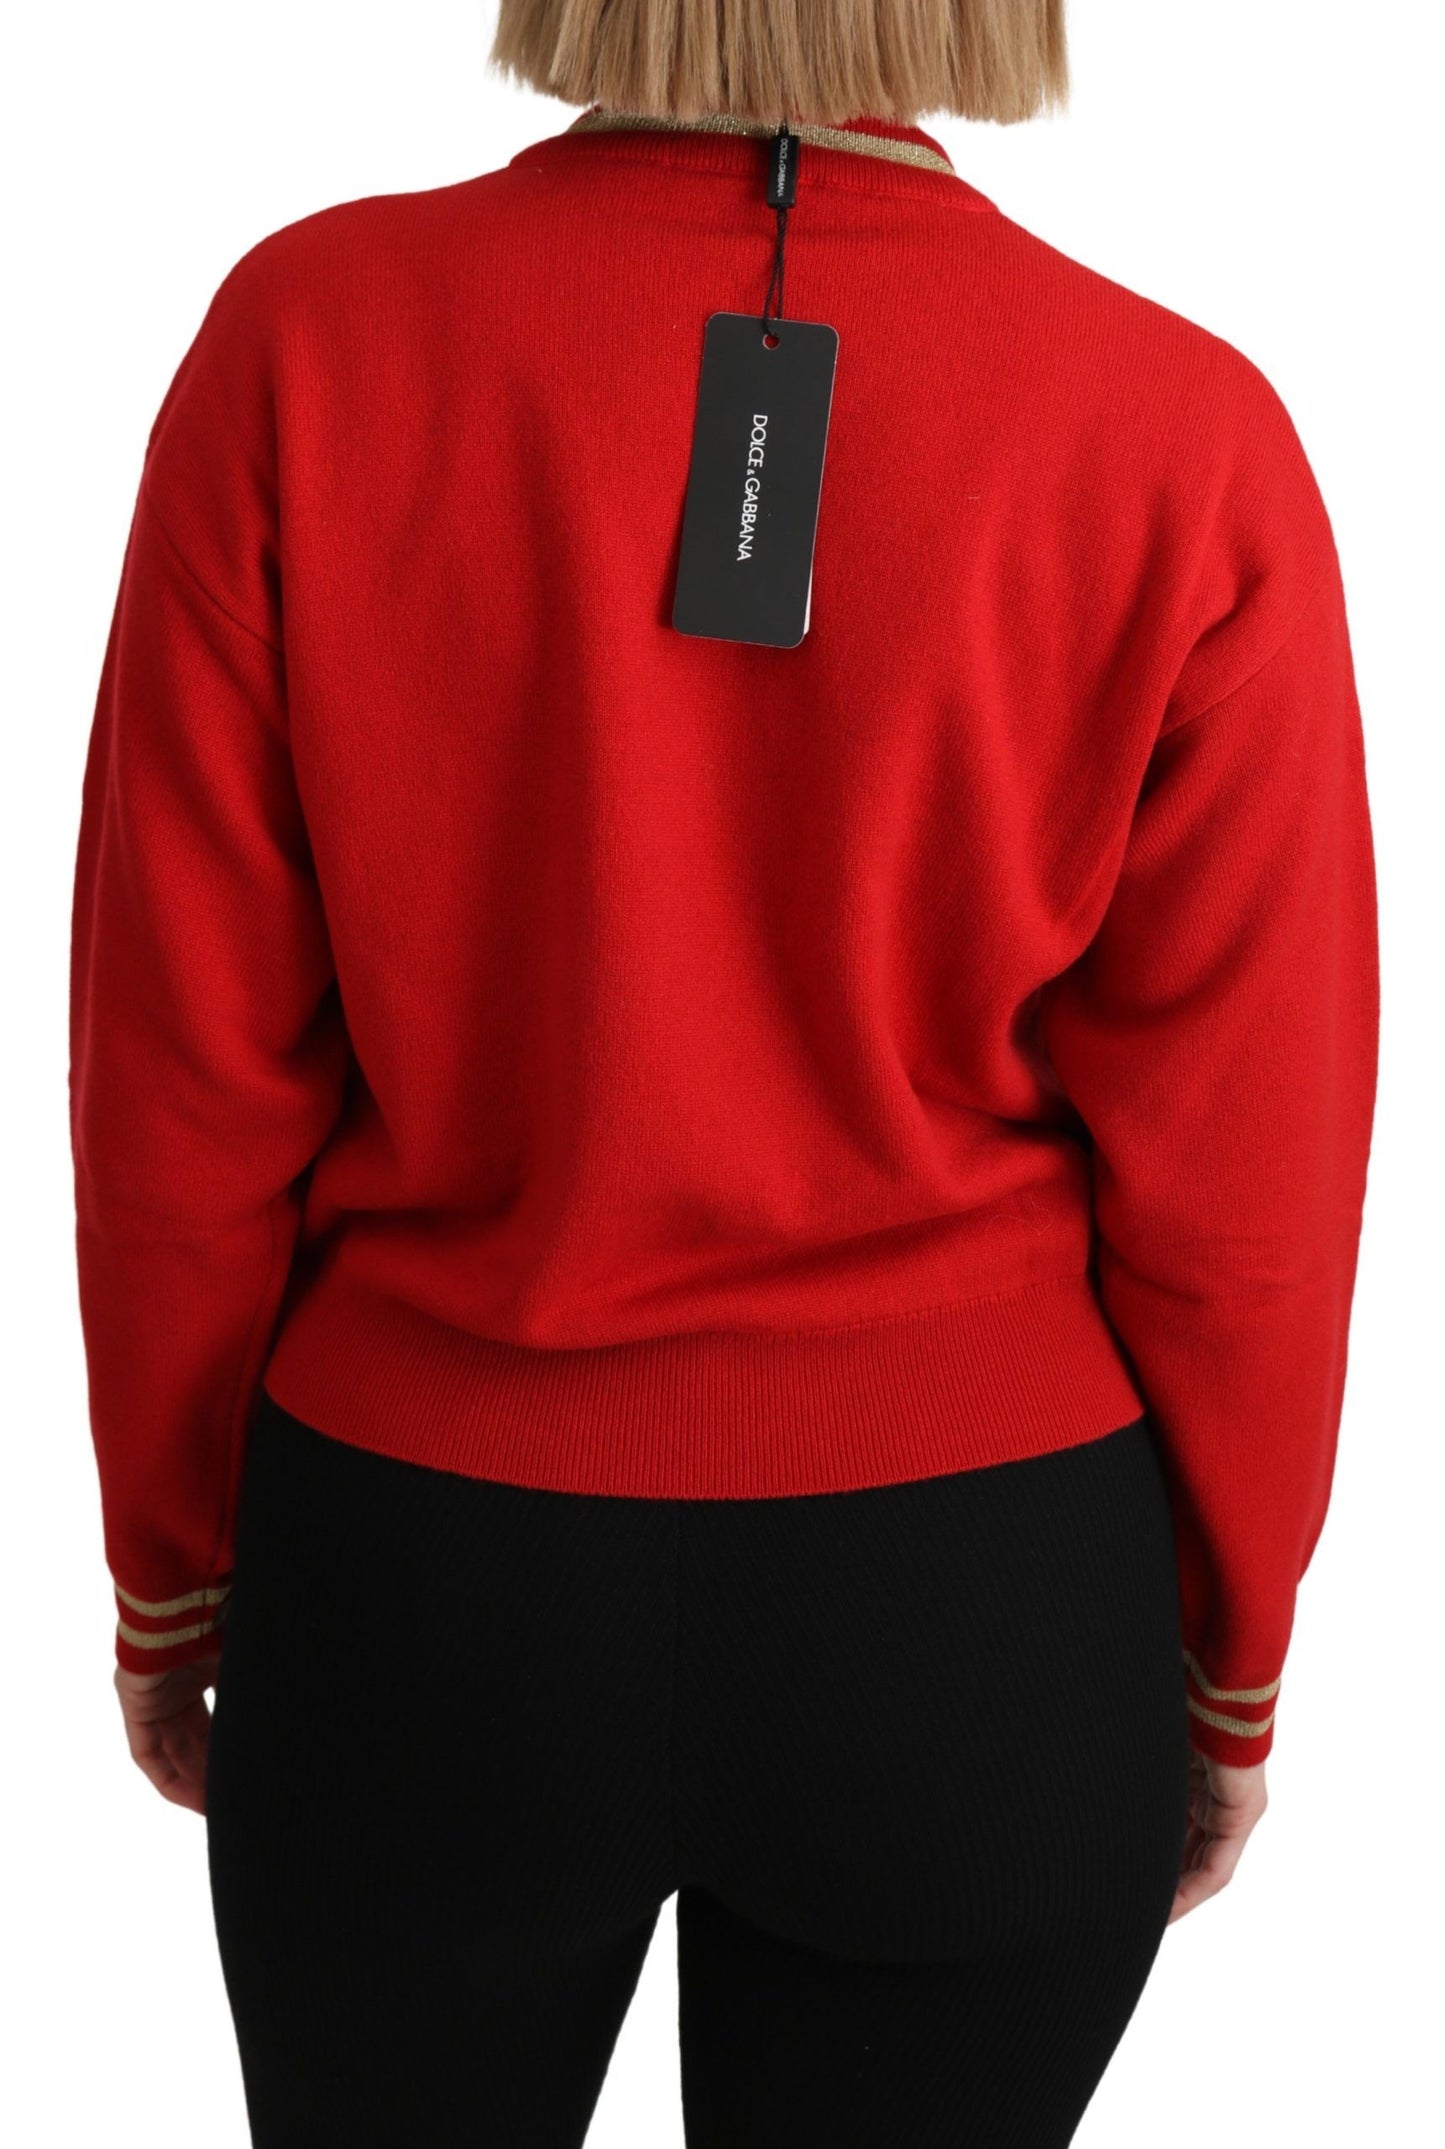 Dolce & Gabbana Red Knitted Cashmere Cartoon Top Sweater